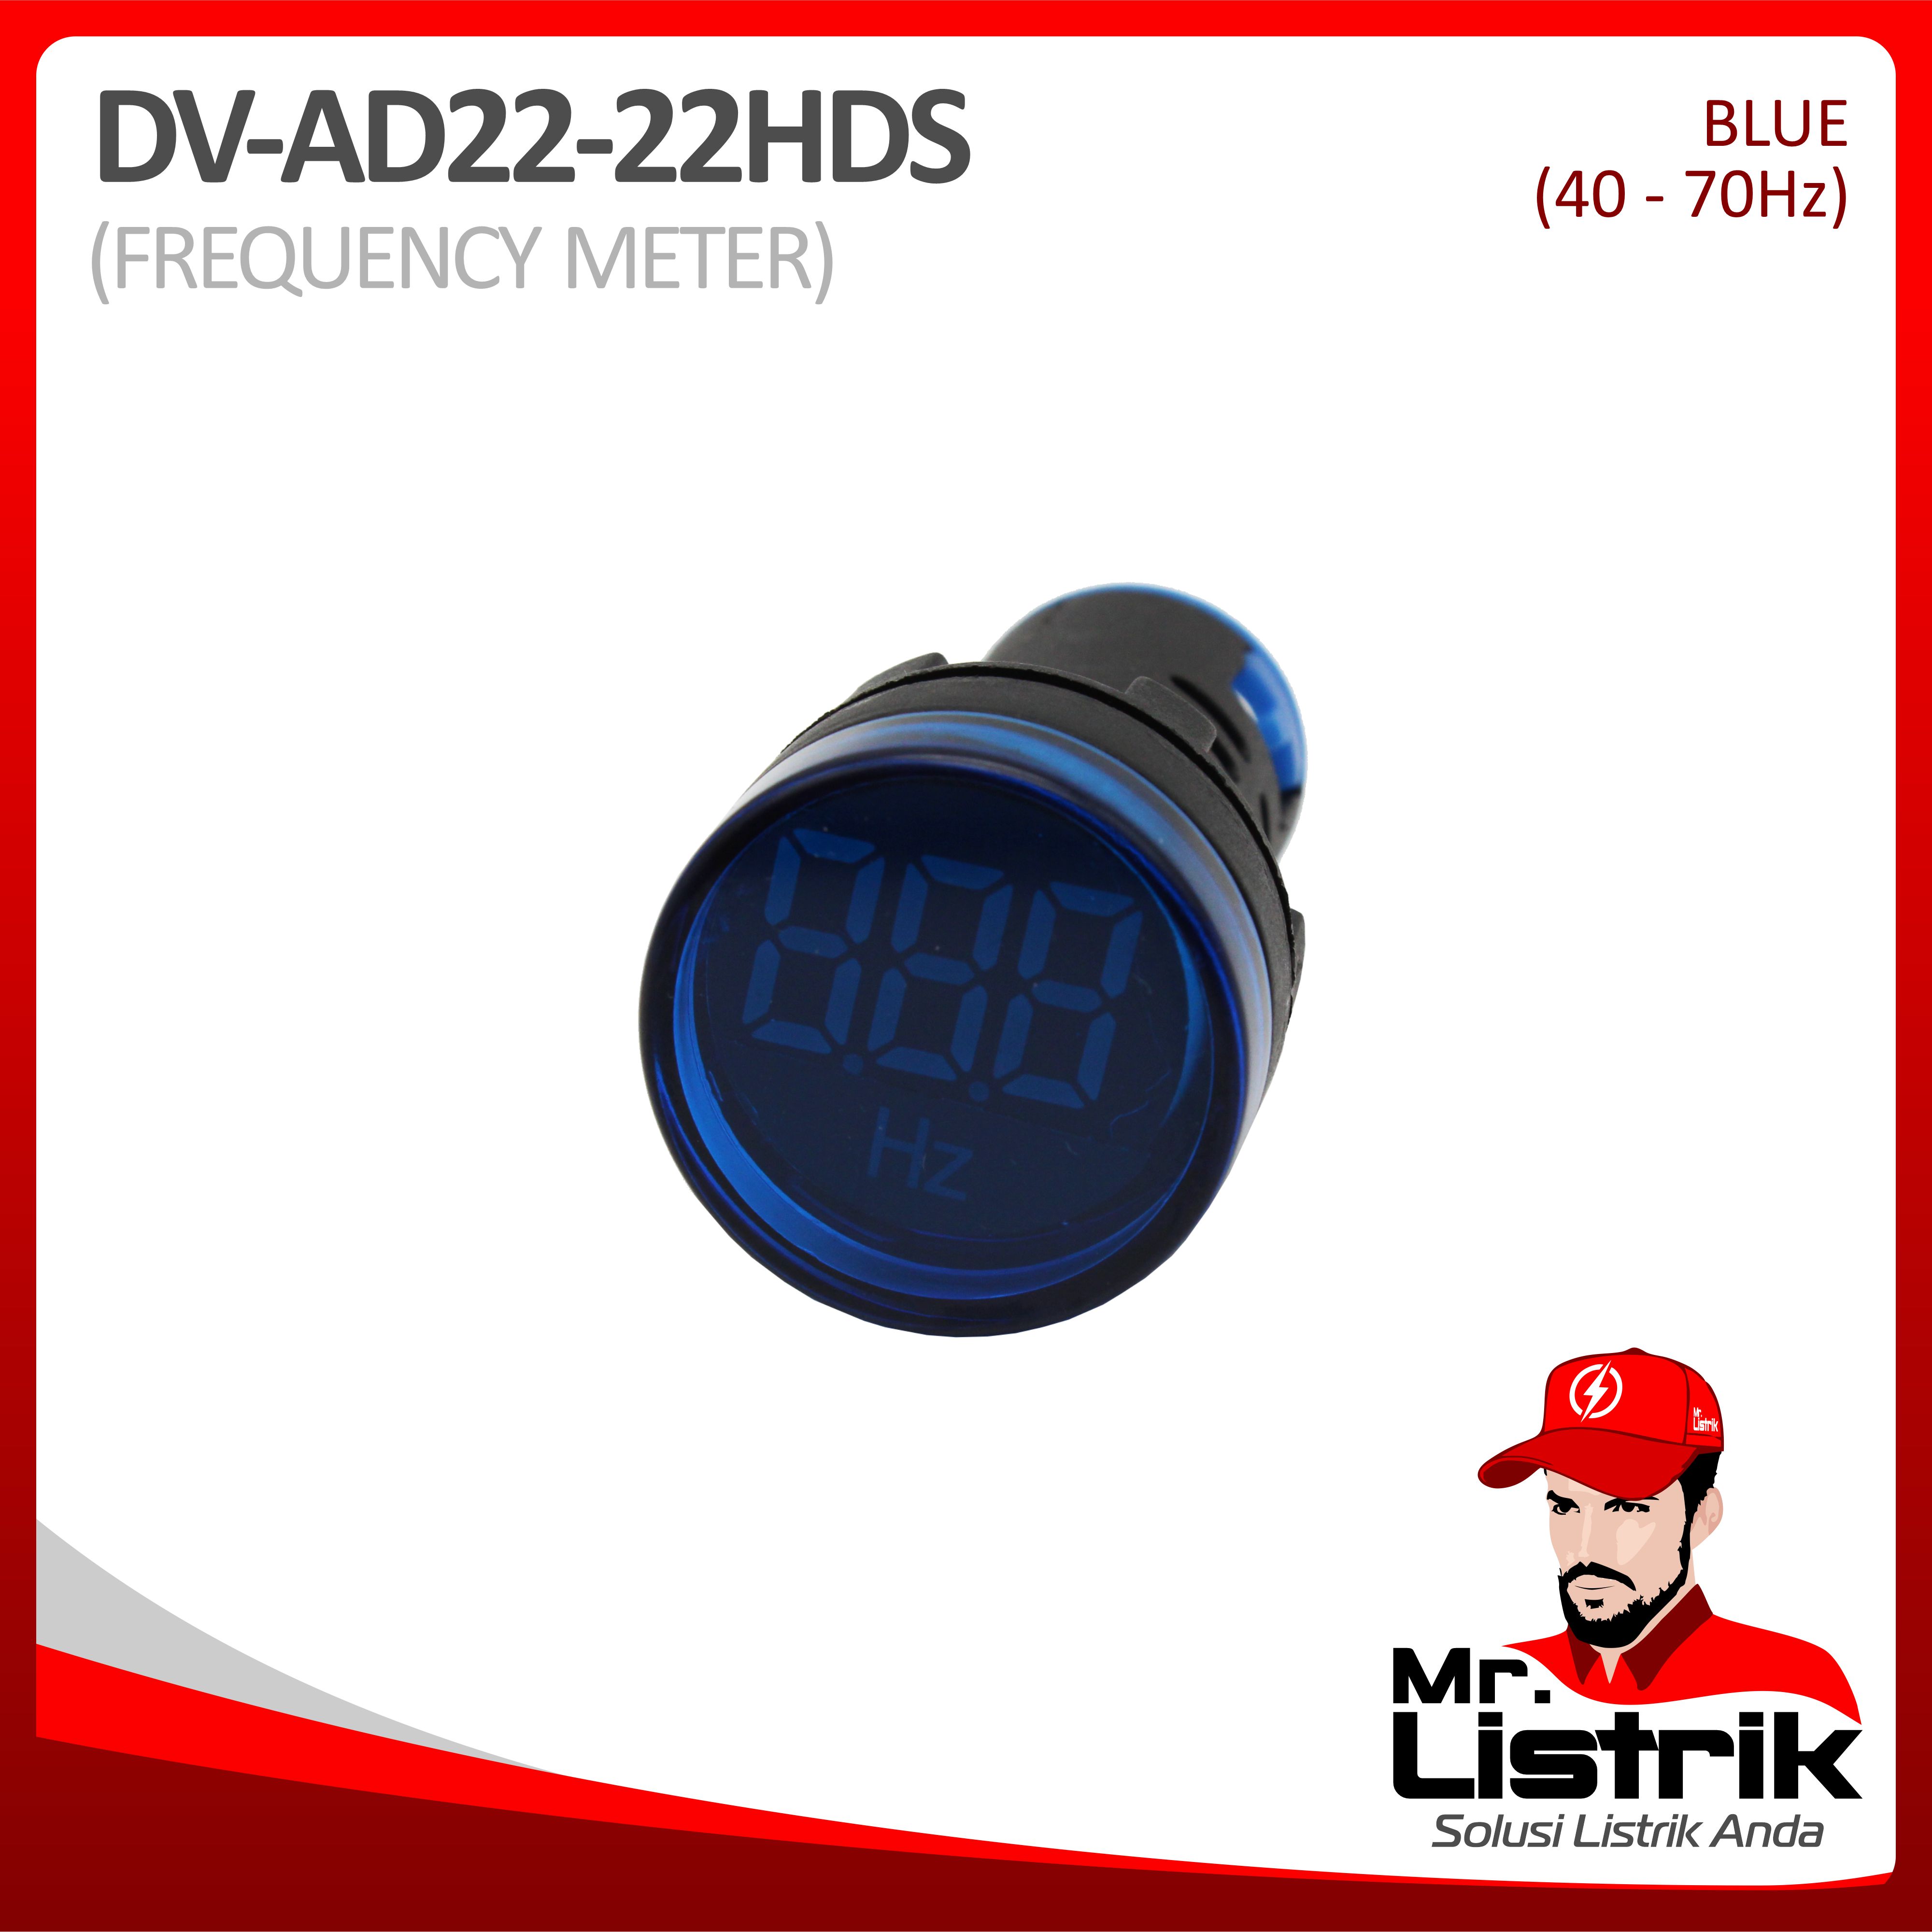 Frequency Meter Lamp 22mm AD22-22HDS - Blue